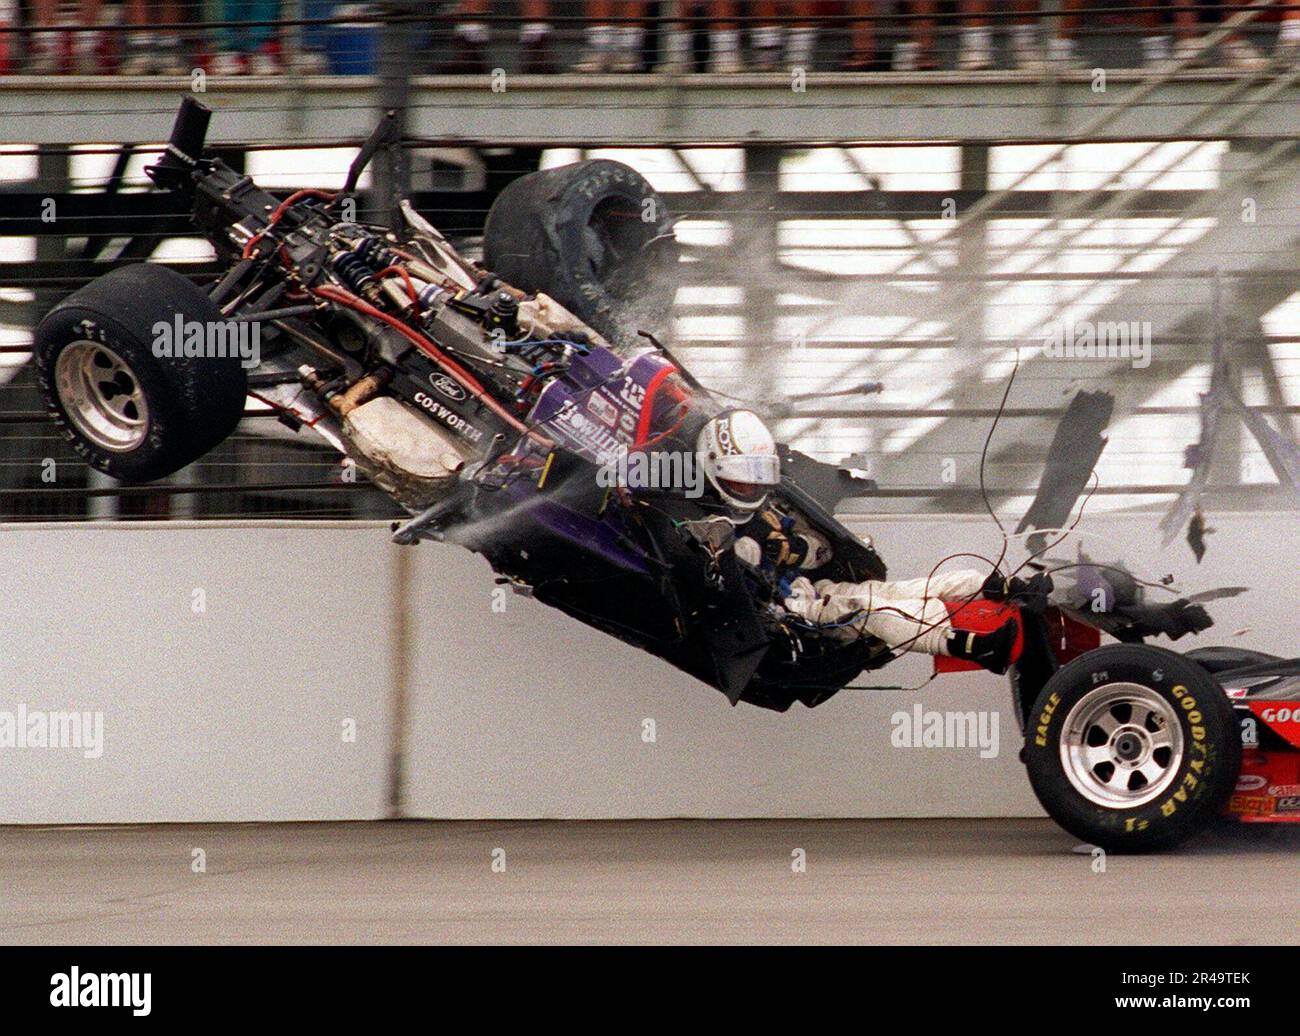 file-stan-fox-his-legs-exposed-sits-in-his-airborne-car-after-the-front-end-was-torn-off-while-slamming-into-the-first-turn-wall-on-the-opening-lap-of-the-indianapolis-500-may-28-1995-foxs-car-had-collided-with-eddie-cheevers-right-both-hitting-the-wall-foxs-legs-were-uninjured-but-he-was-hospitalized-with-serious-head-injuries-following-a-deadly-crash-in-1973-indianapolis-motor-speedway-put-a-number-of-safeguards-in-place-and-eventually-indy-car-cockpits-were-repositioned-to-protect-the-legs-and-feet-of-drivers-and-tubs-were-made-of-stronger-safer-materials-to-increase-safety-2R49TEK.jpg